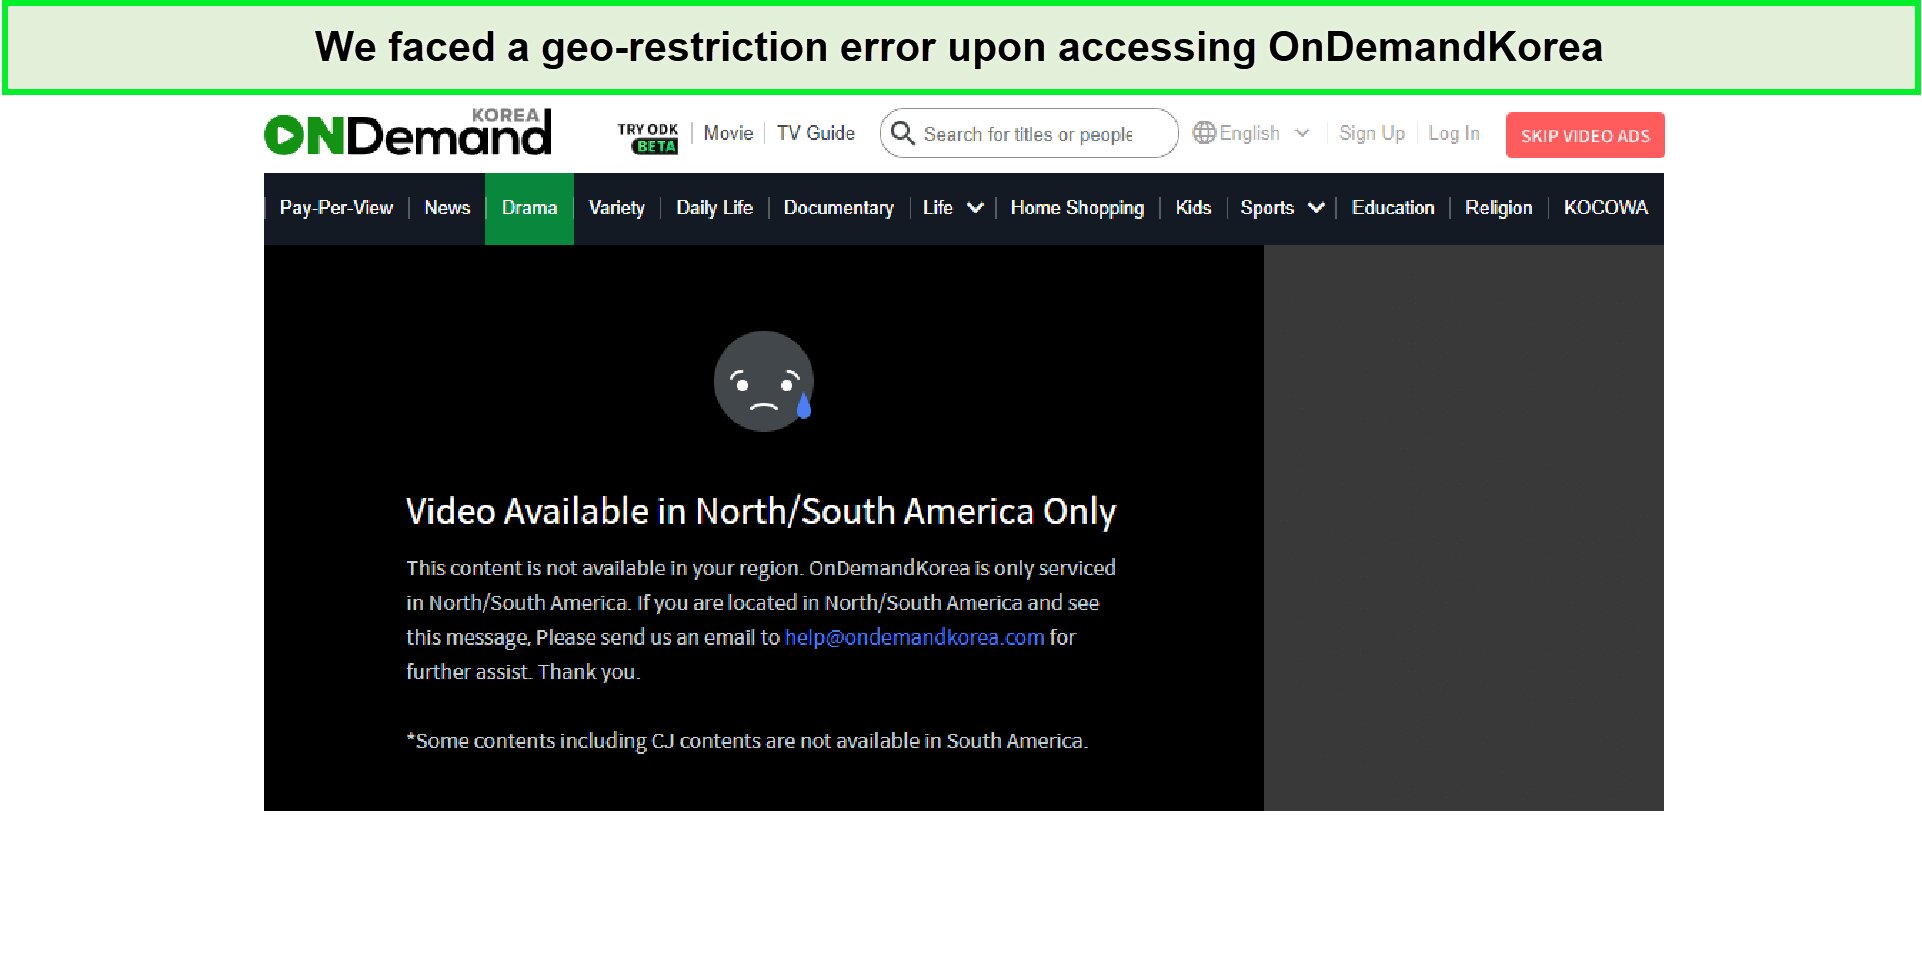 Why Do You Need a VPN to Stream OnDemandKorea Outside the US?